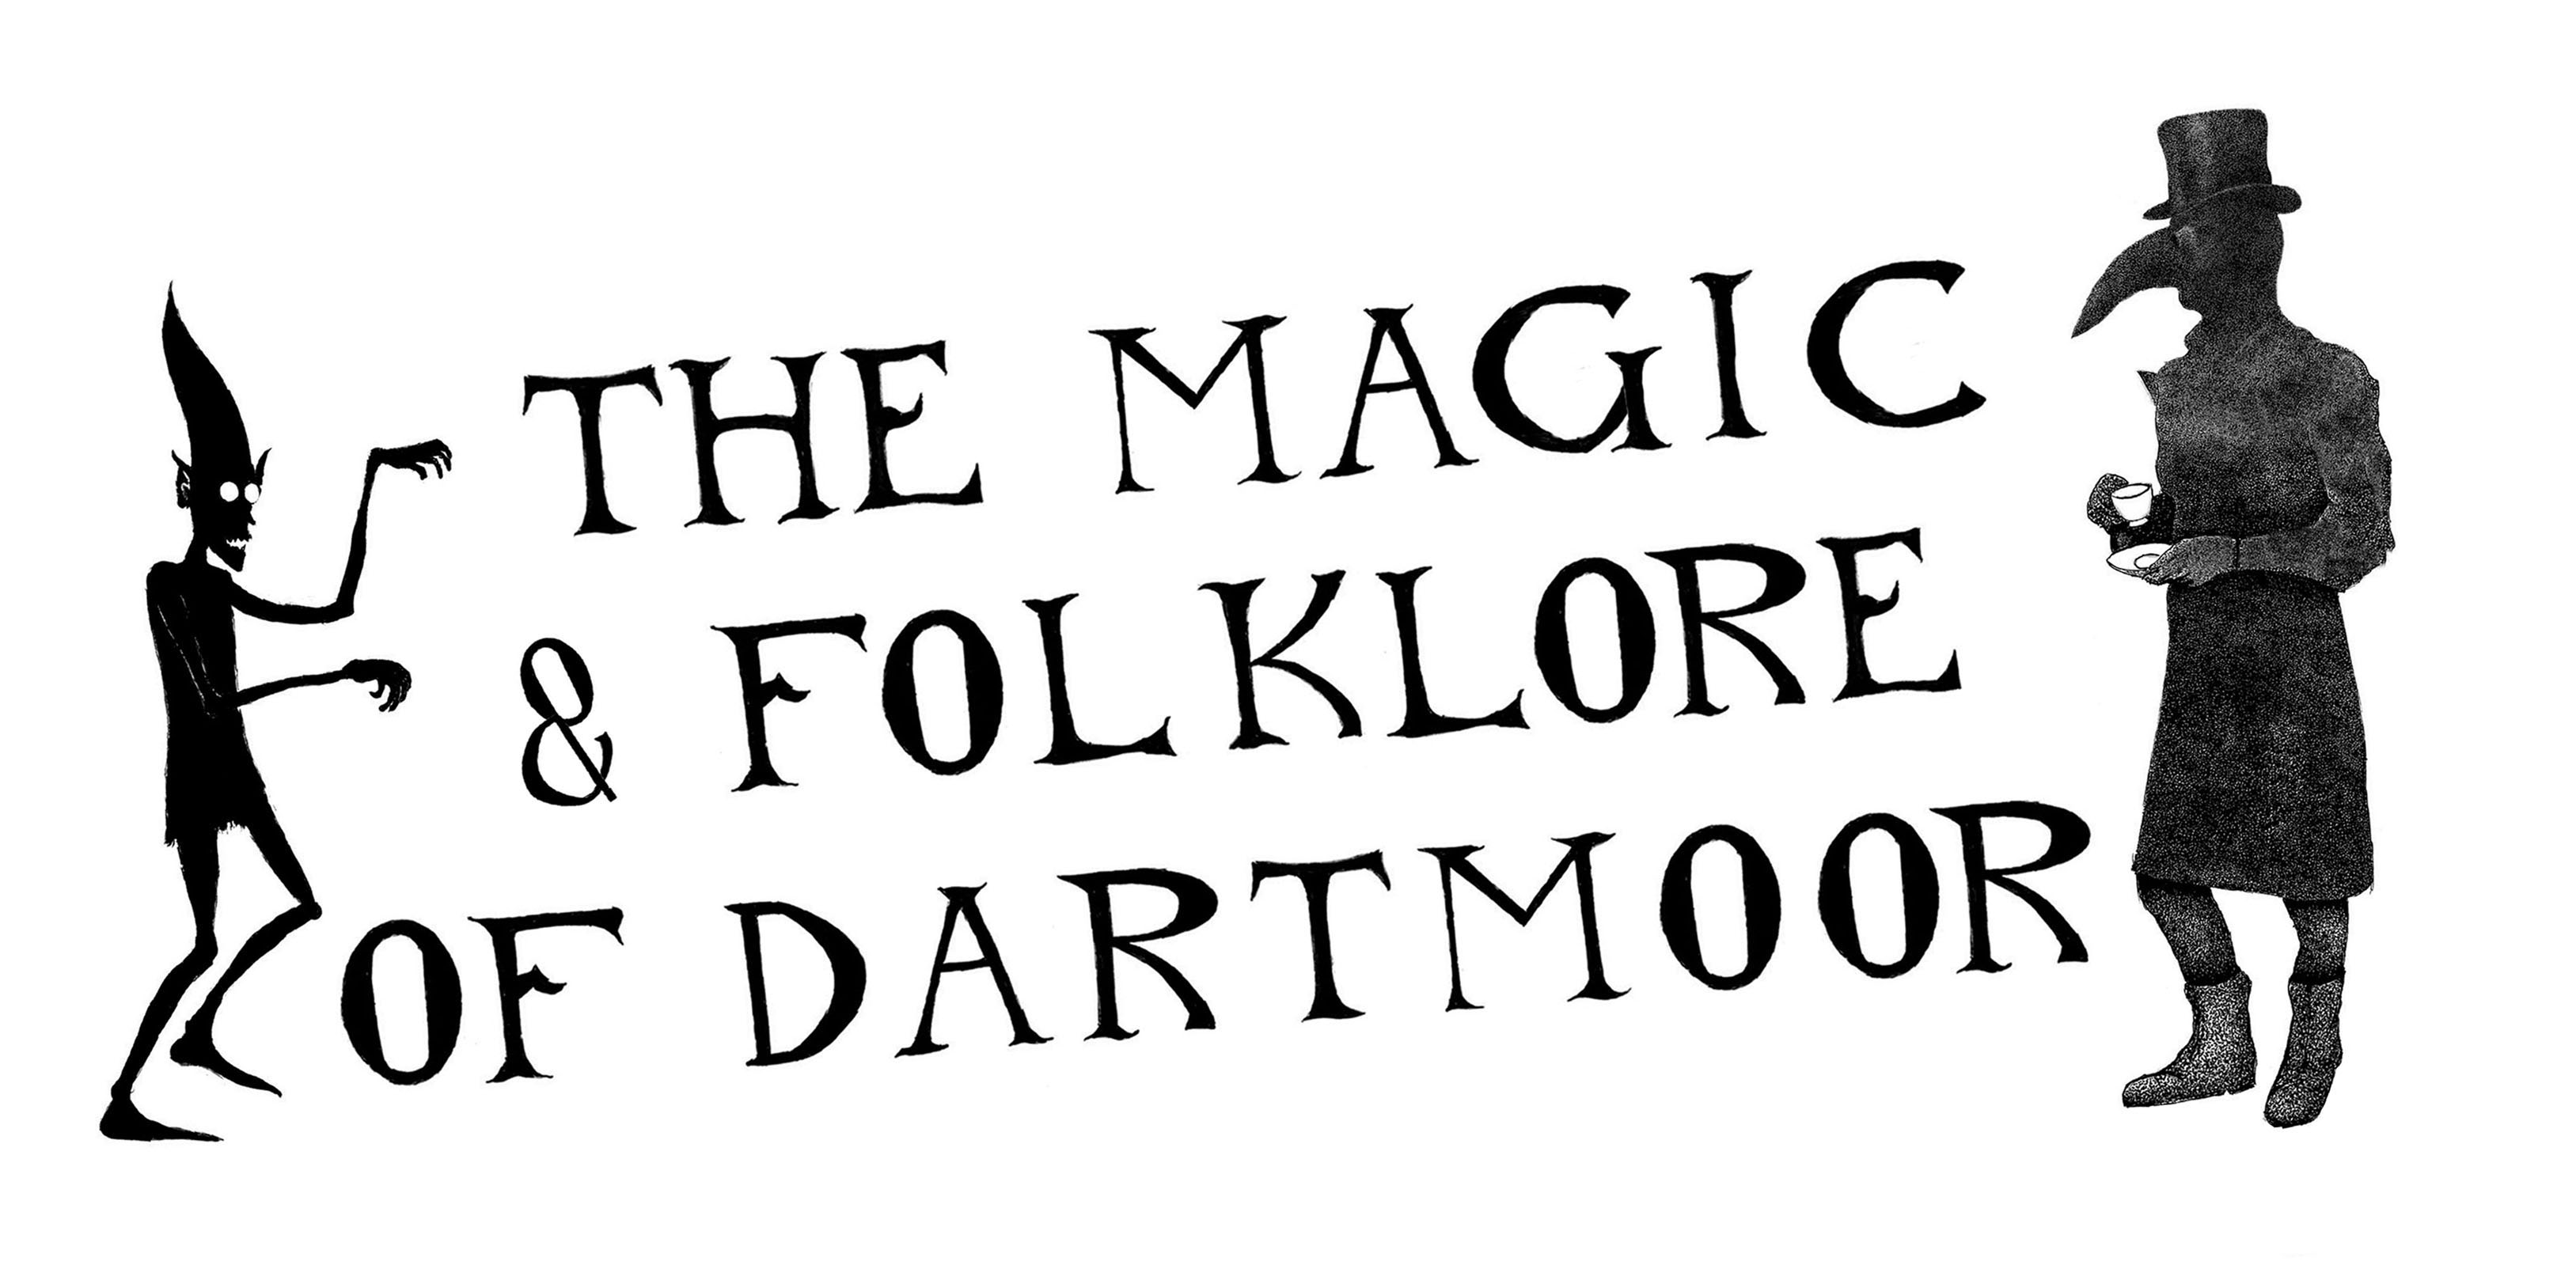 Ethan-Pennell_The-Magic-&-Folklore-of-Dartmoor